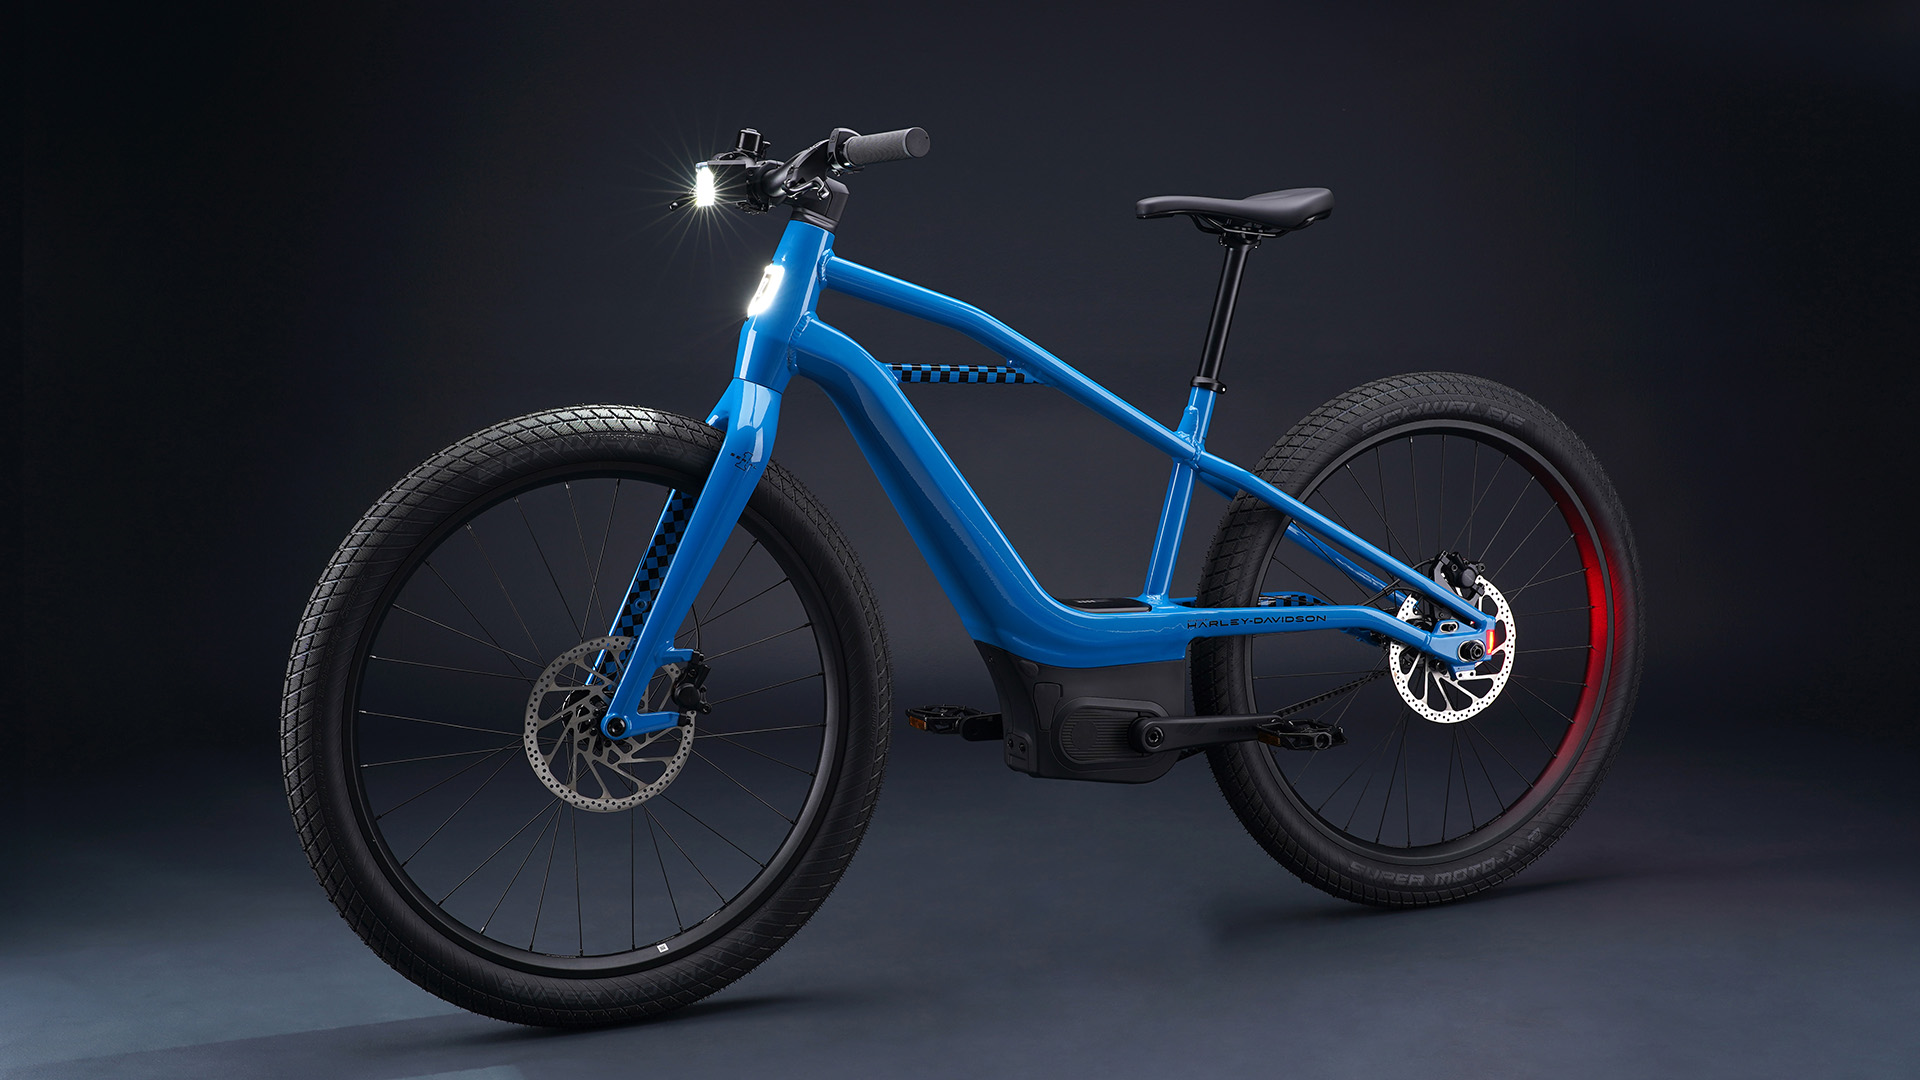 fairy Rudyard Kipling Favor Serial 1 Mosh/Cty ebike review: smart and powerful but not perfect | T3